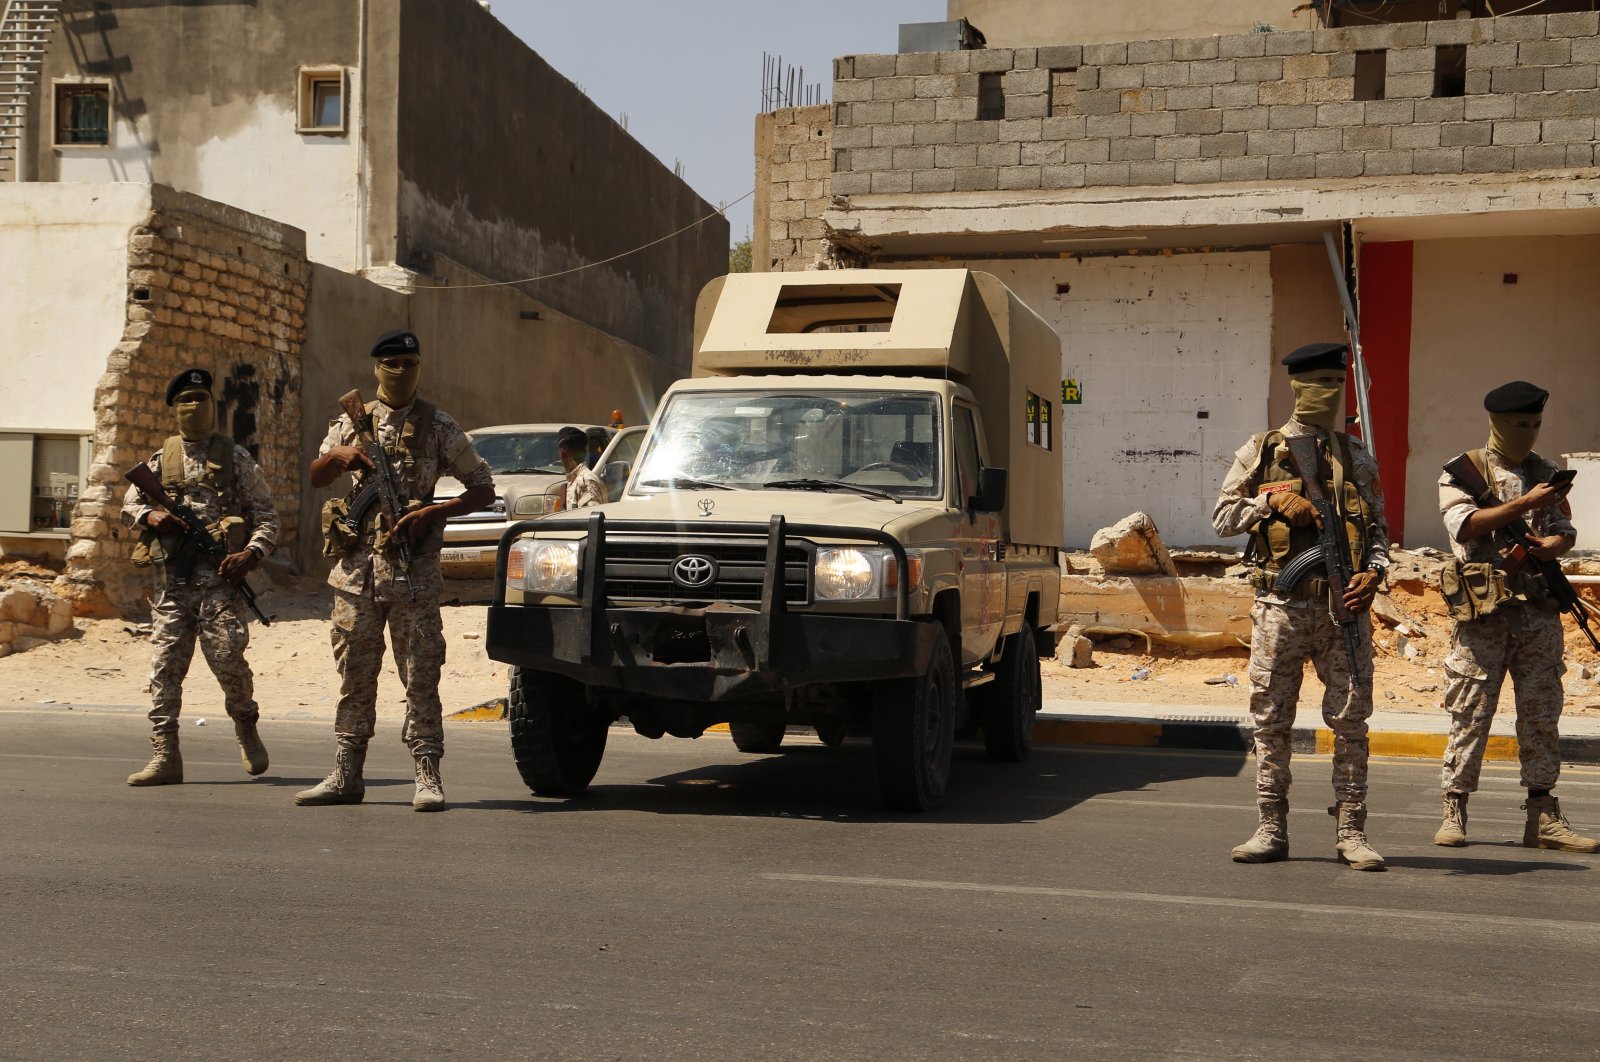 Libyan army forces and vehicles are stationed in a street in the country’s capital of Tripoli, Libya, Friday, July 22, 2022. (AP Photo)